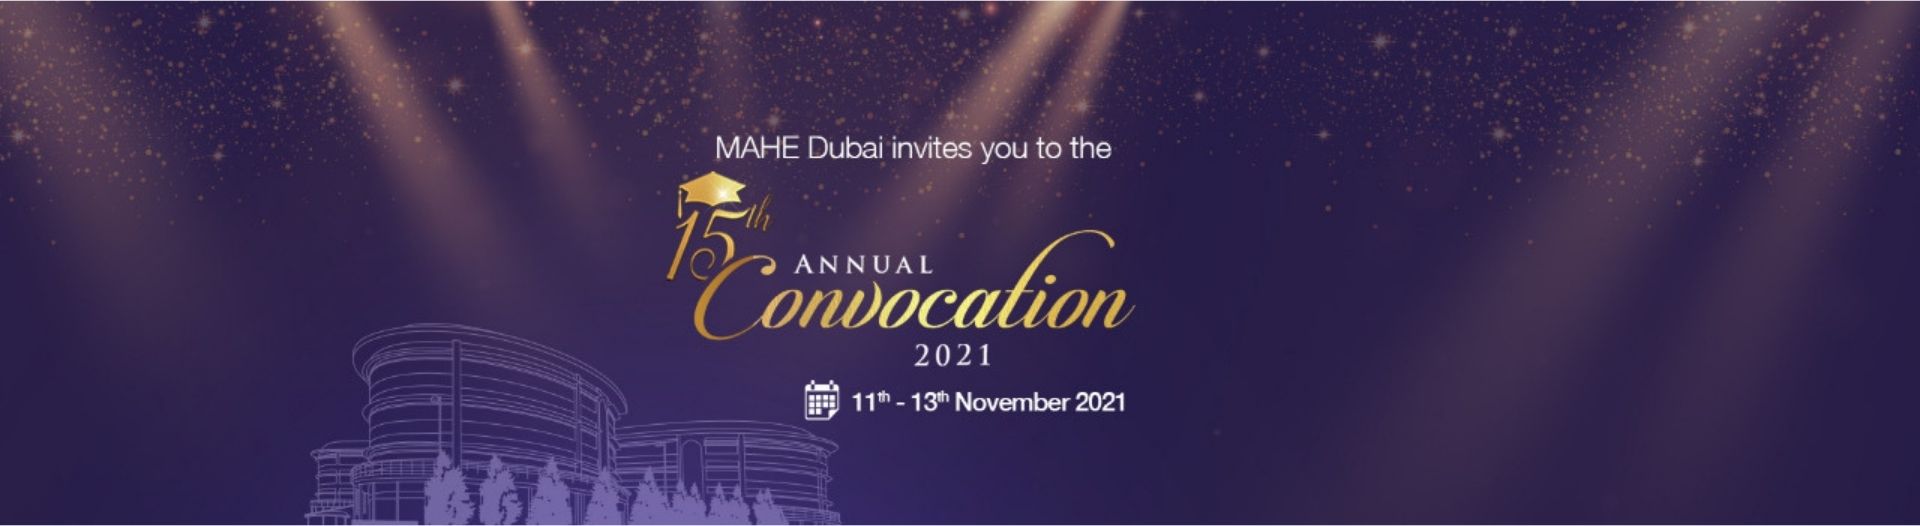 Convocation 2021 | Manipal Academy of Higher Education, Dubai Campus